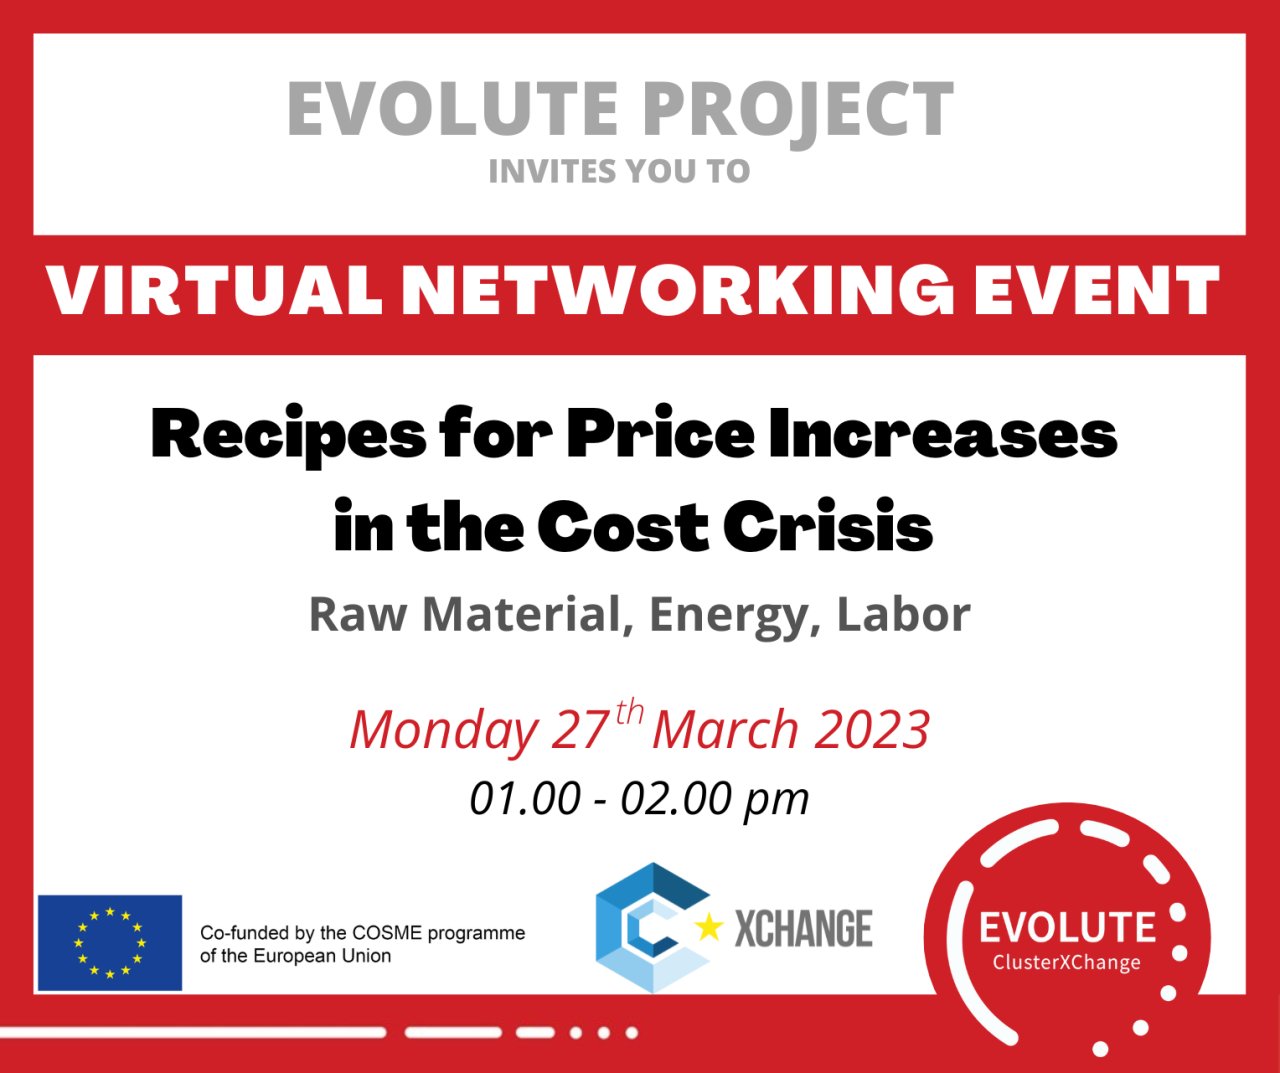 NETWORKING EVOLUTE EVENT - 27 march 2023